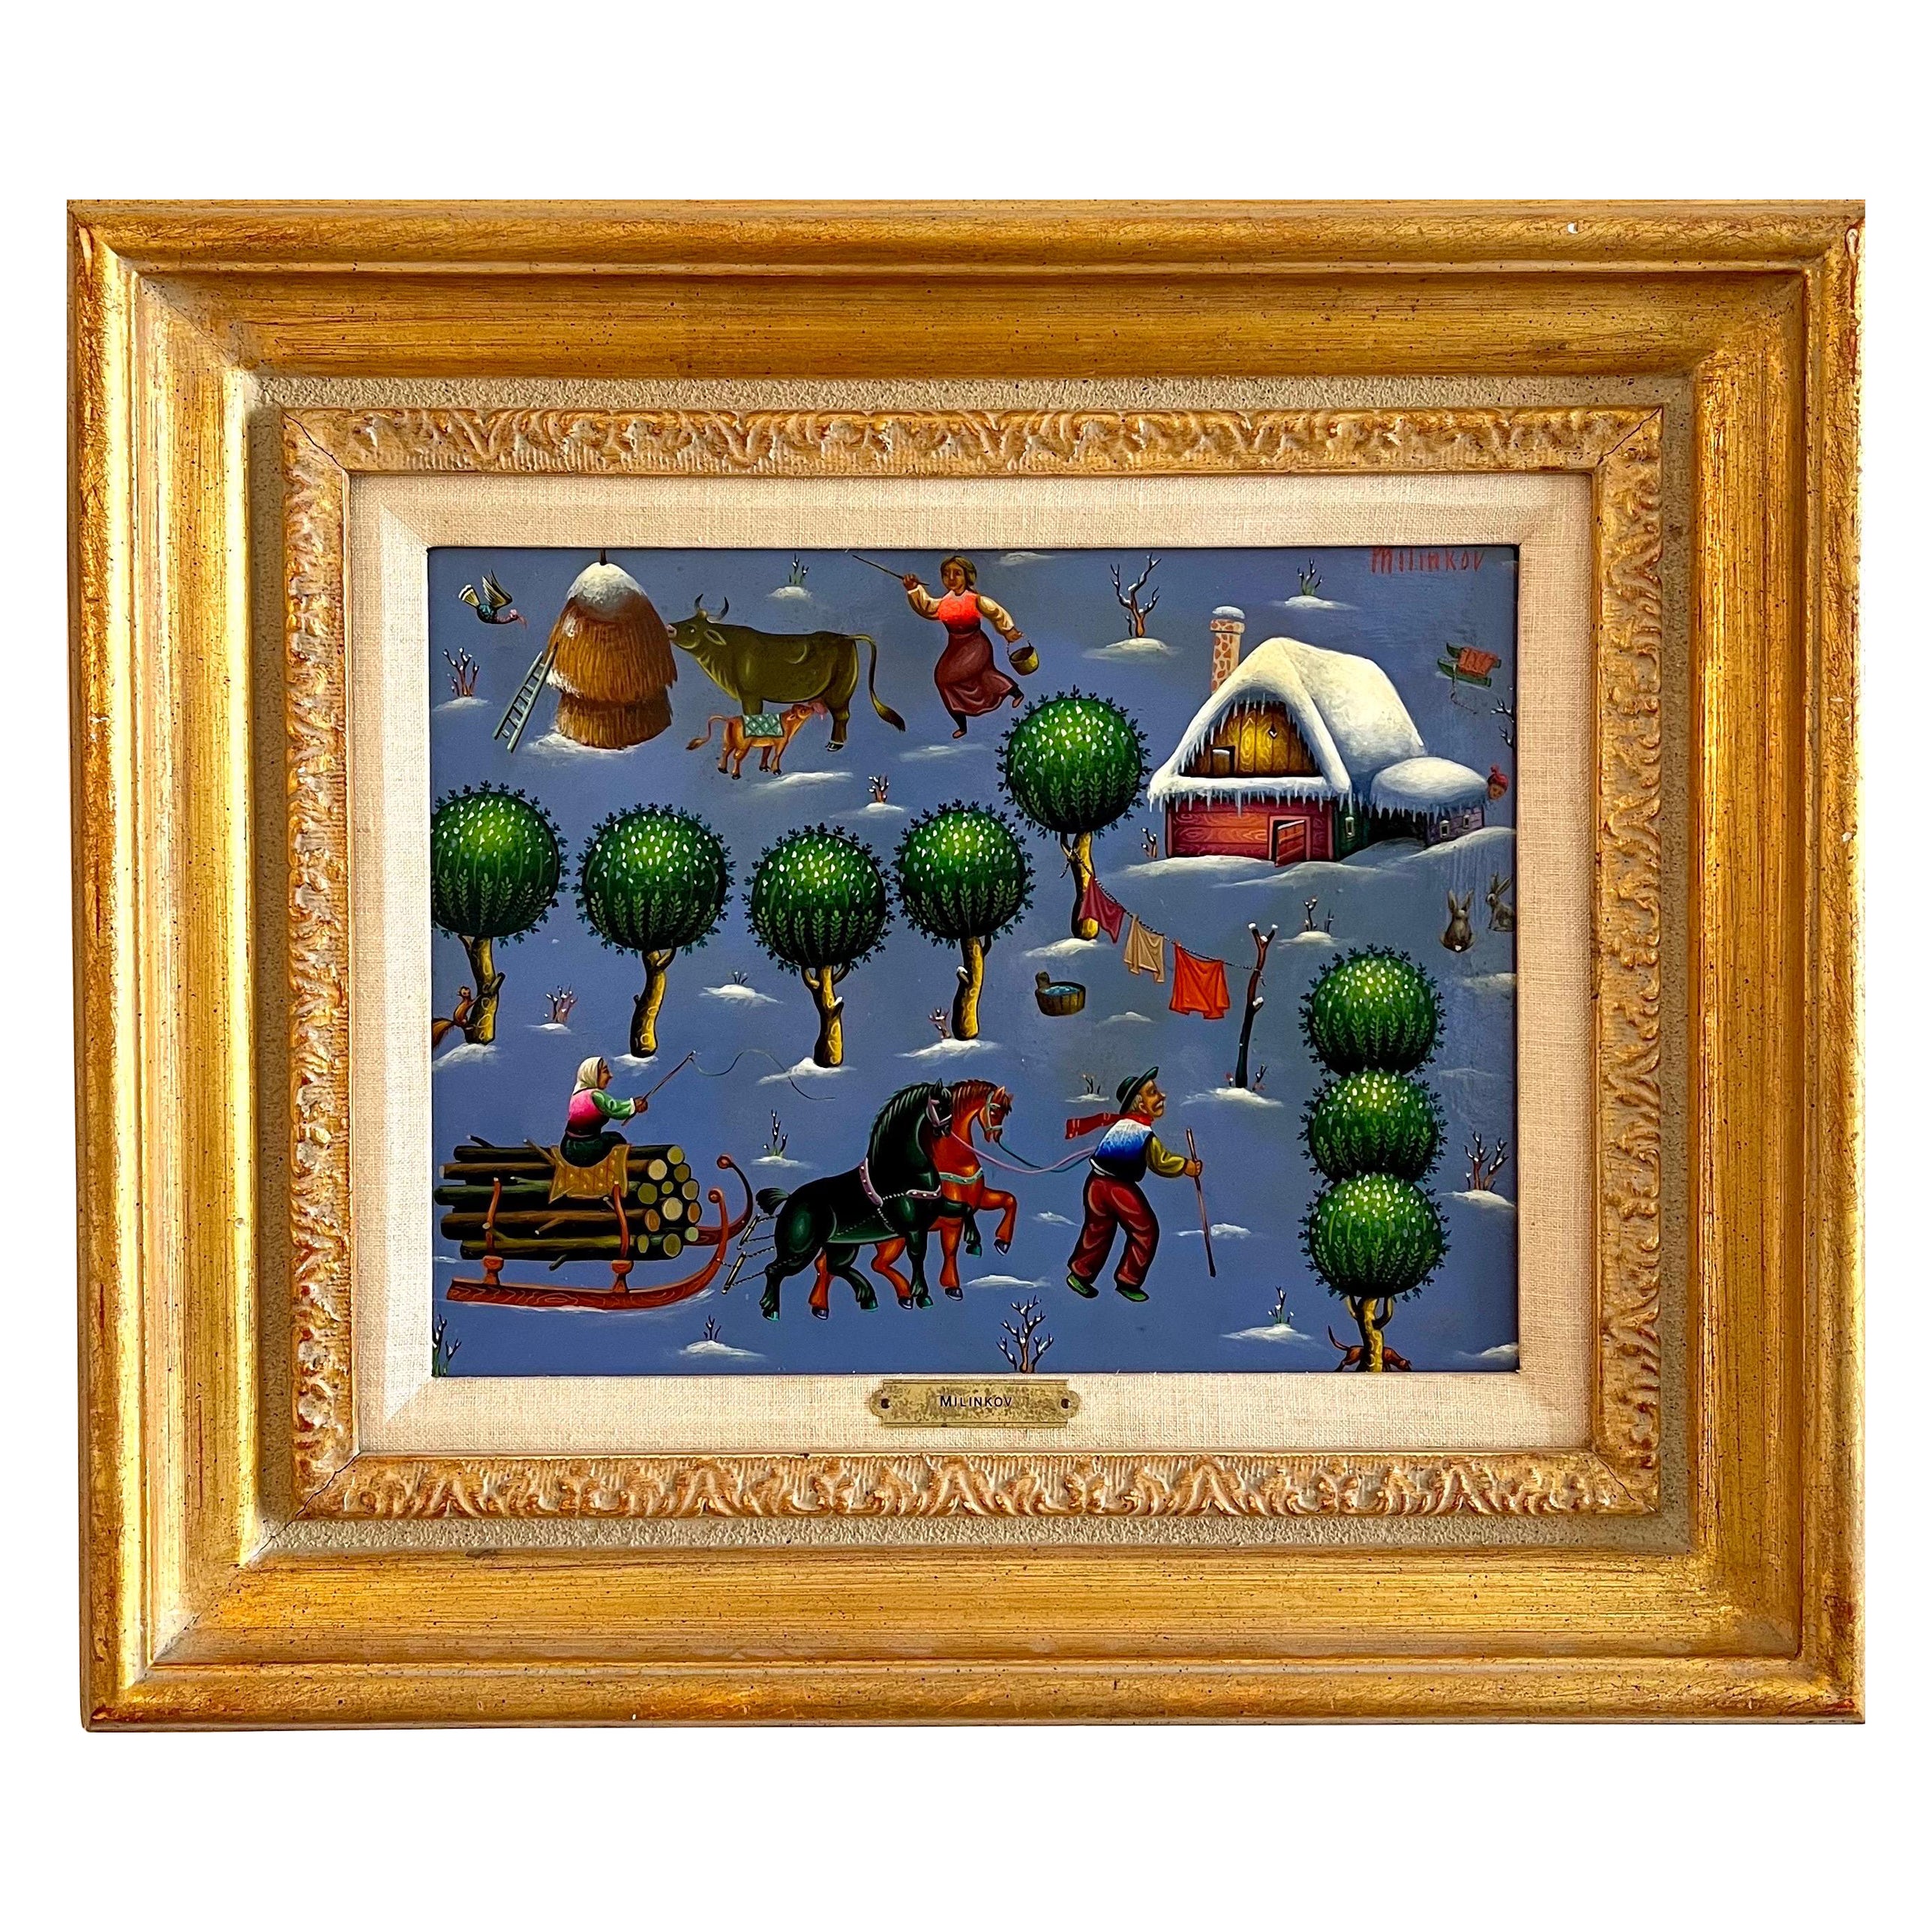 Ljubomir Milinkov (1938) 
Oil painting on board, 
Whimsical pastoral farm landscape 
Hand signed upper right, 
Dimensions: painting 12-1/2 x 15-1/2 inches. framed 18.5 x 21.5 inches

Ljubomir Milinkov depicts a fantasy like setting using bold